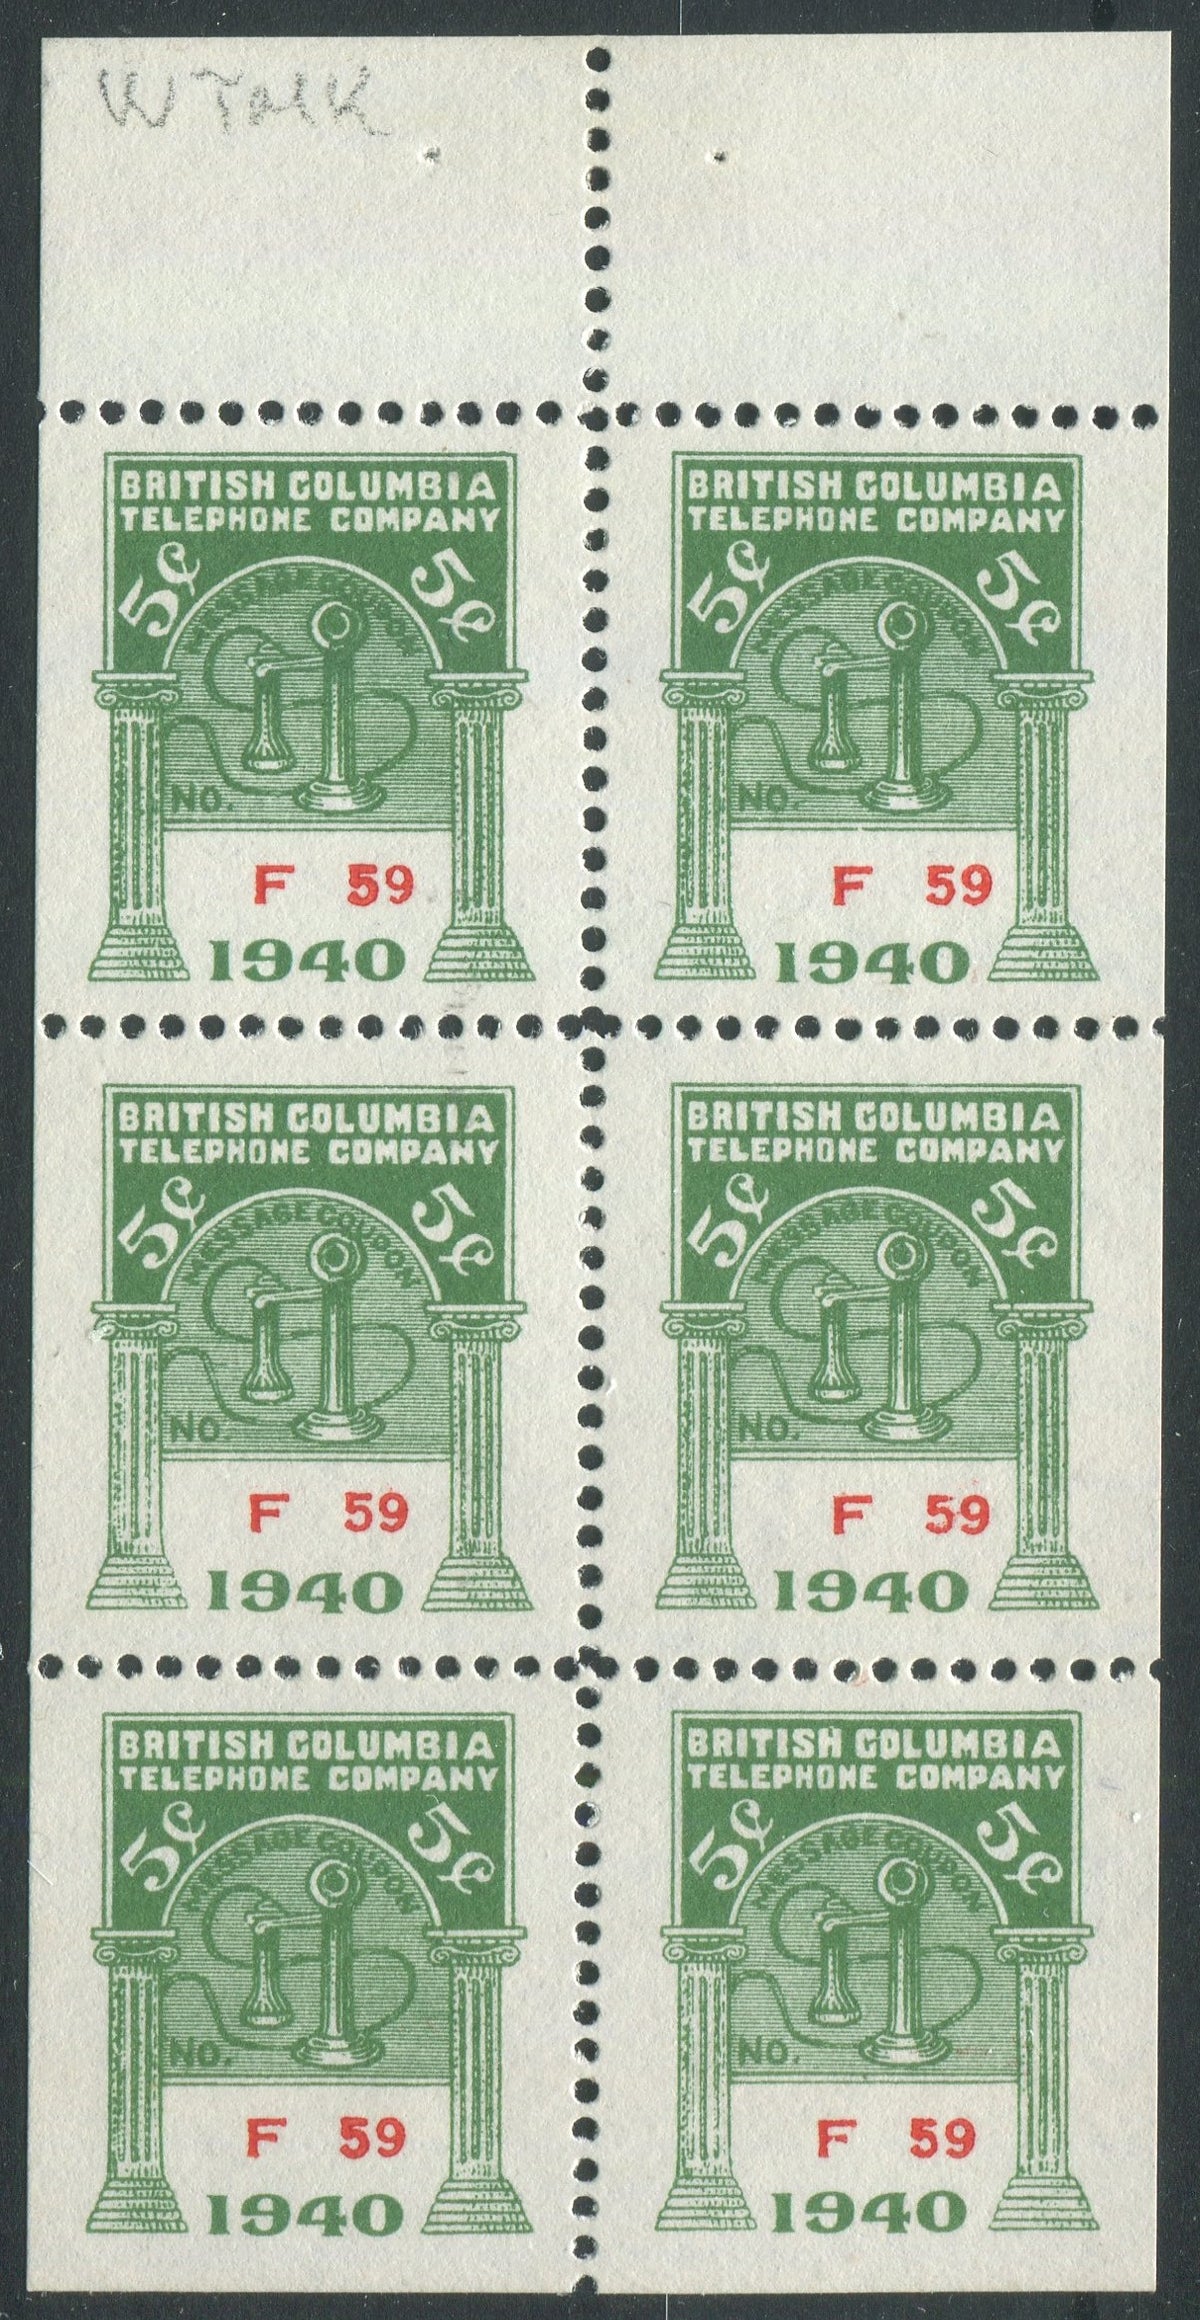 0228BC2010 - BCT130 - Mint Booklet Pane, Watermarked